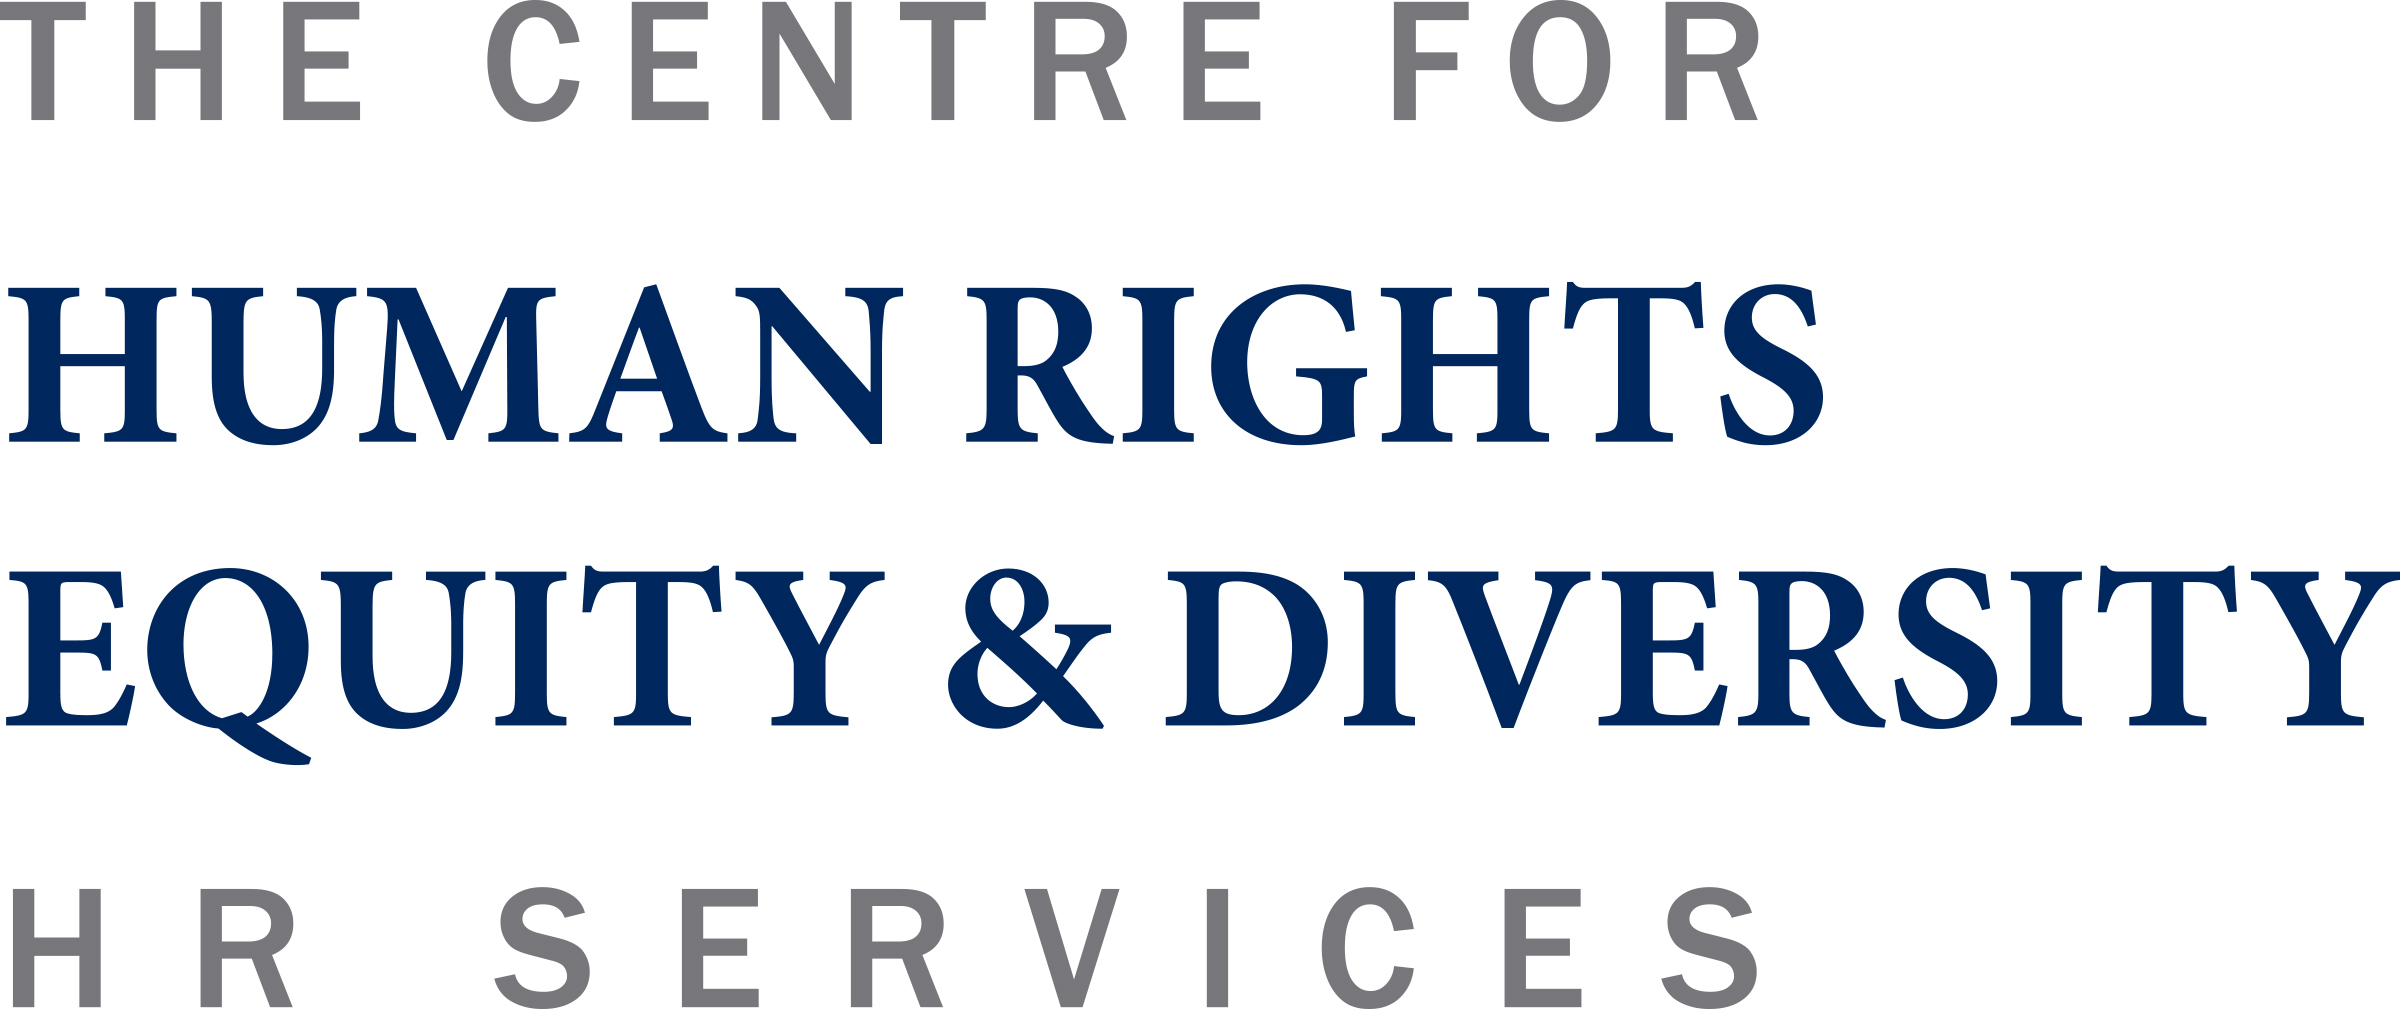 The Centre for Human Rights, Equity & Diversity